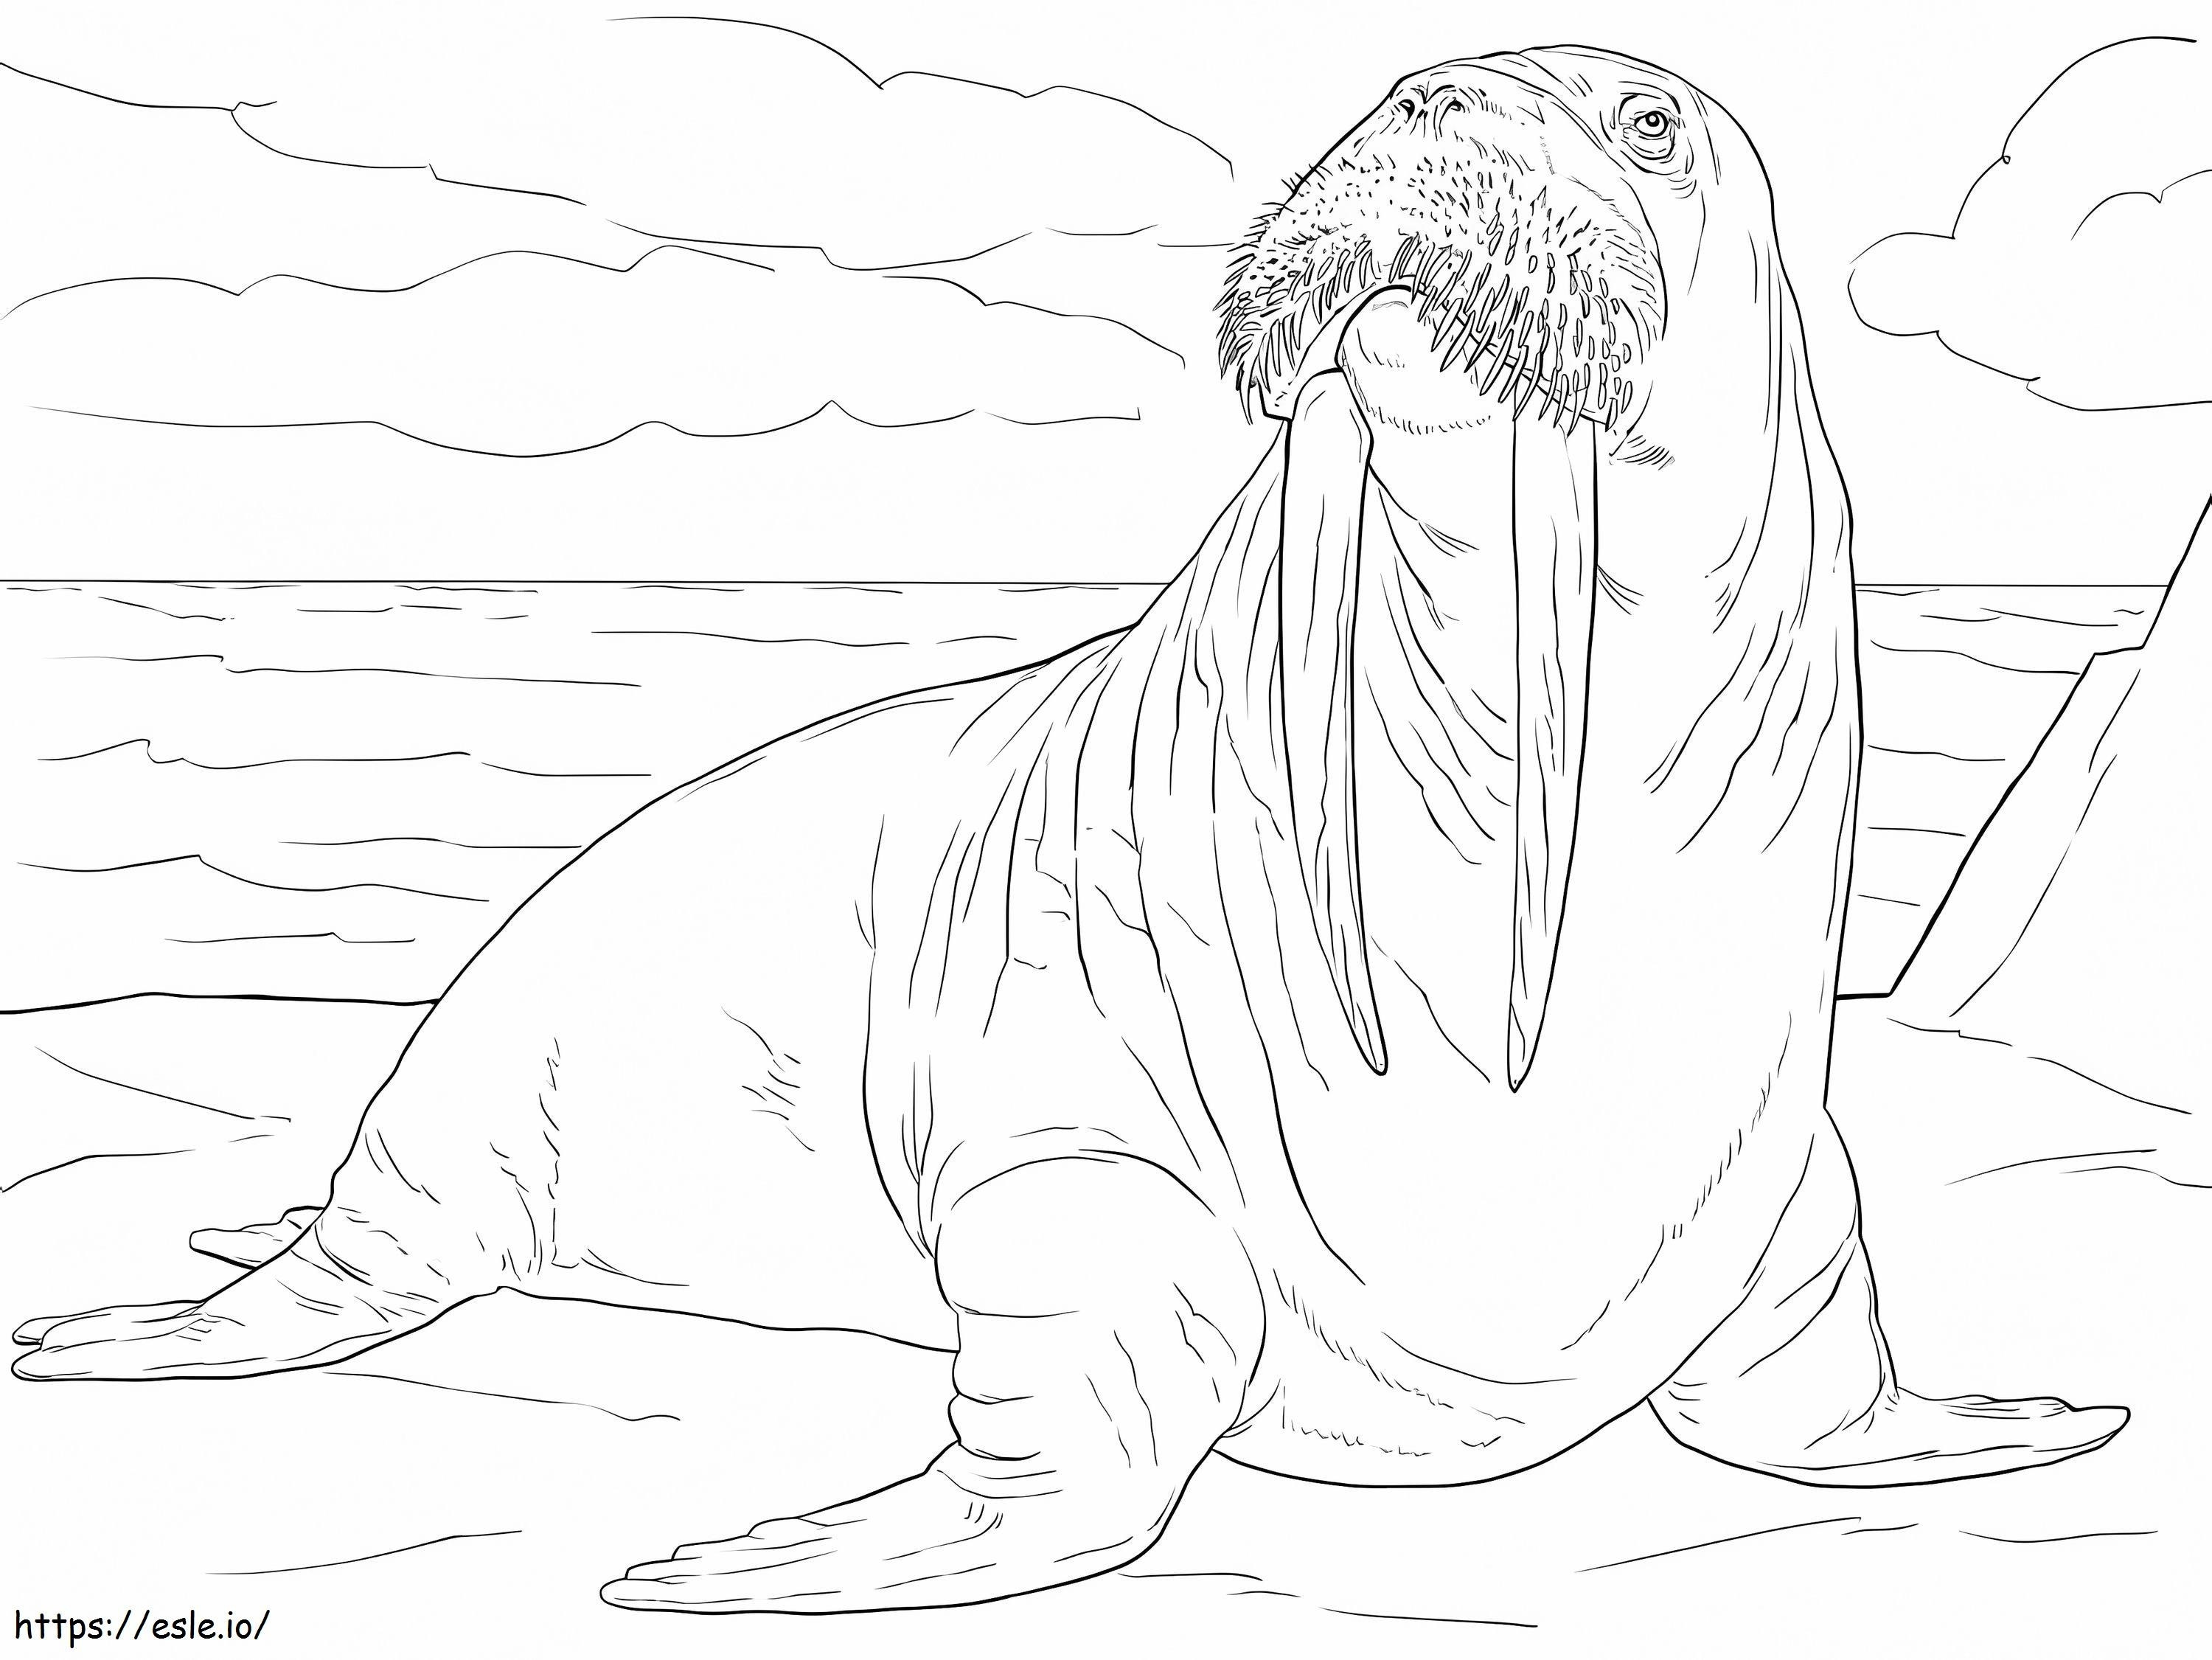 Adult Walrus coloring page